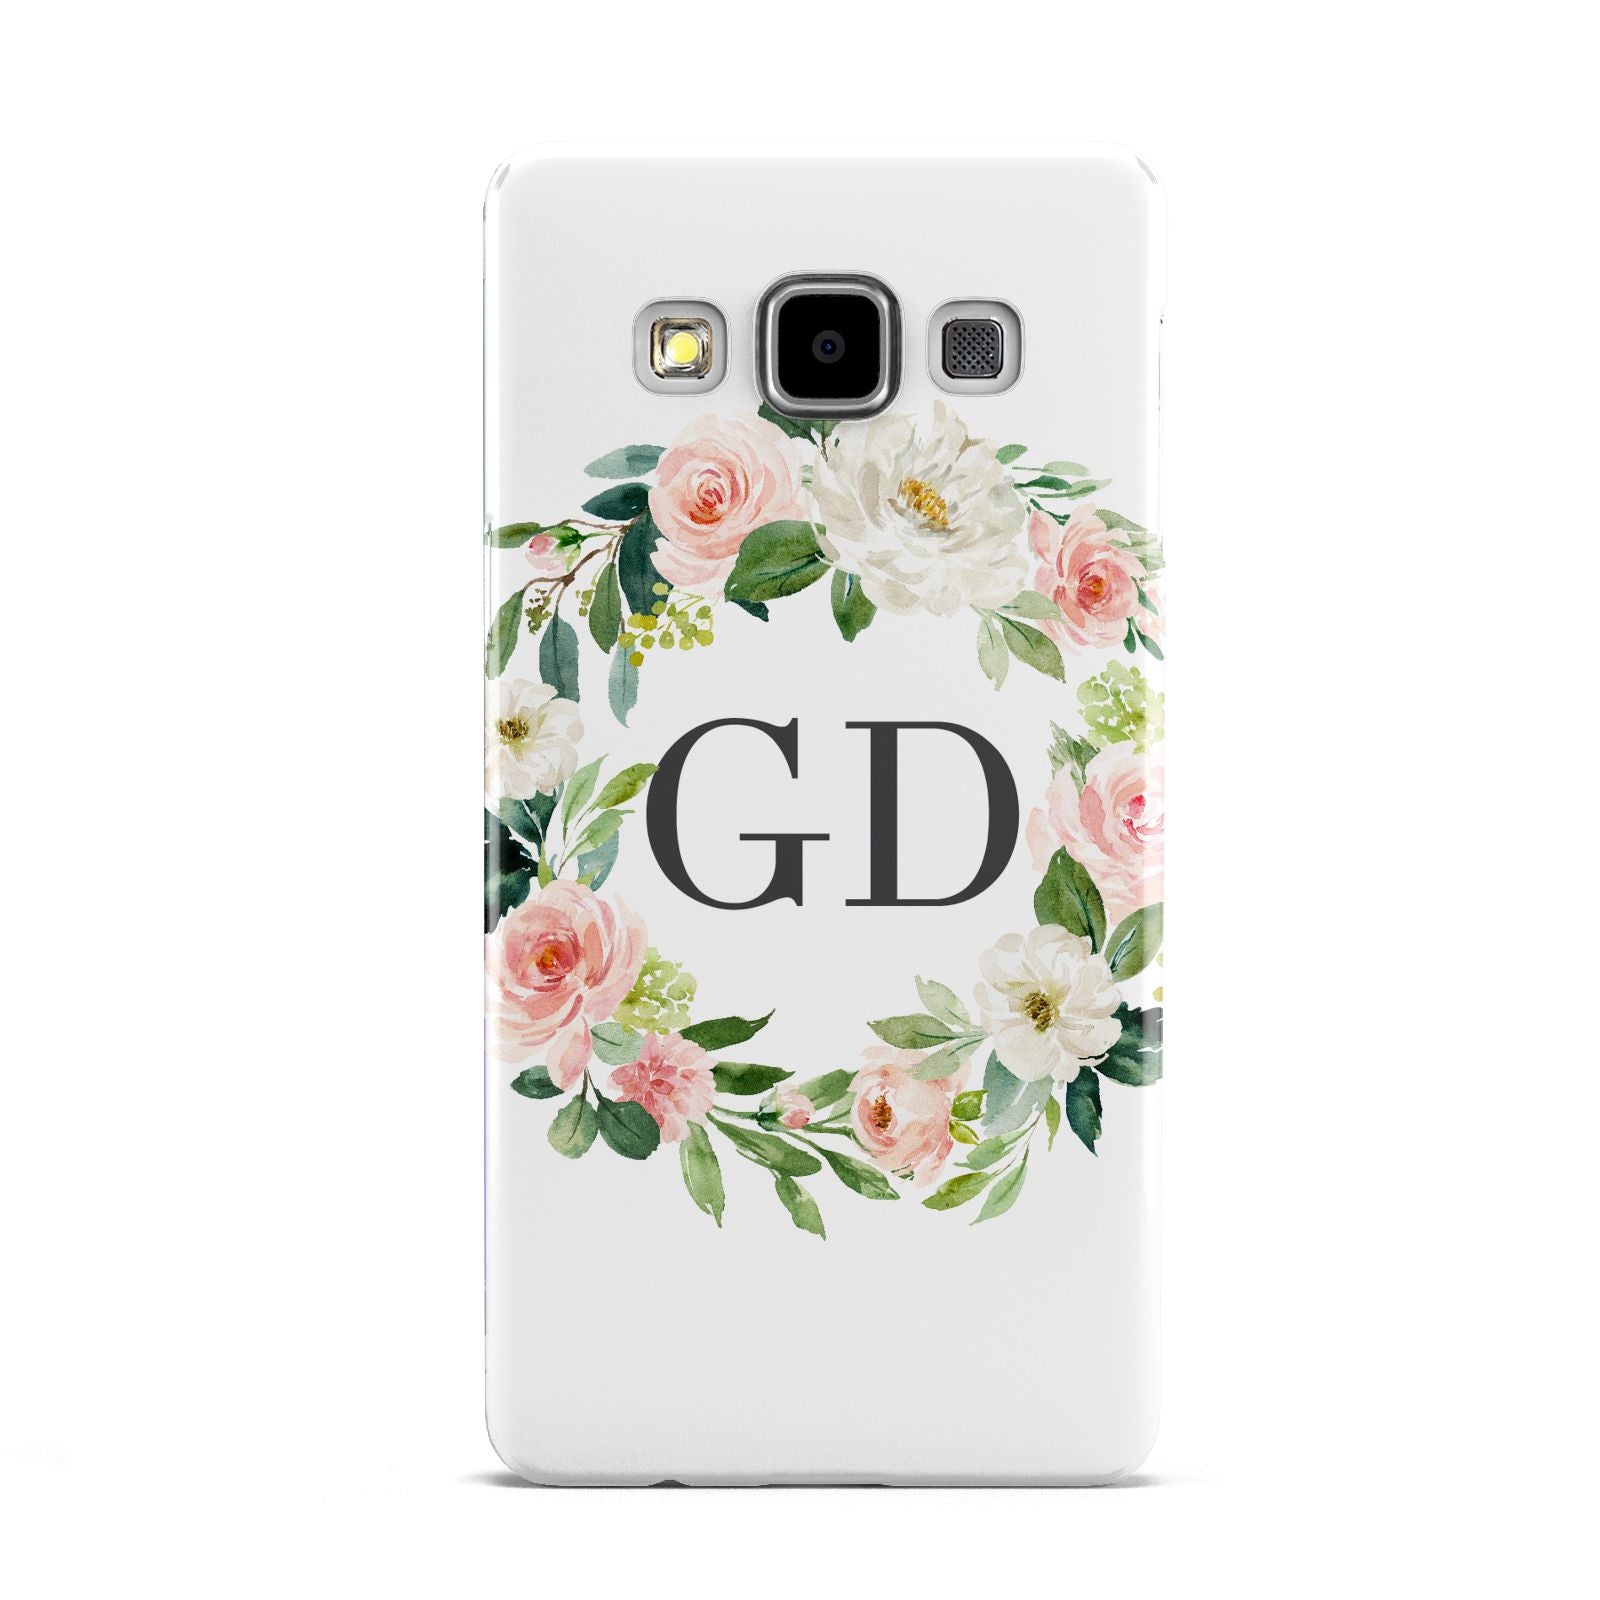 Personalised floral wreath Samsung Galaxy A5 Case